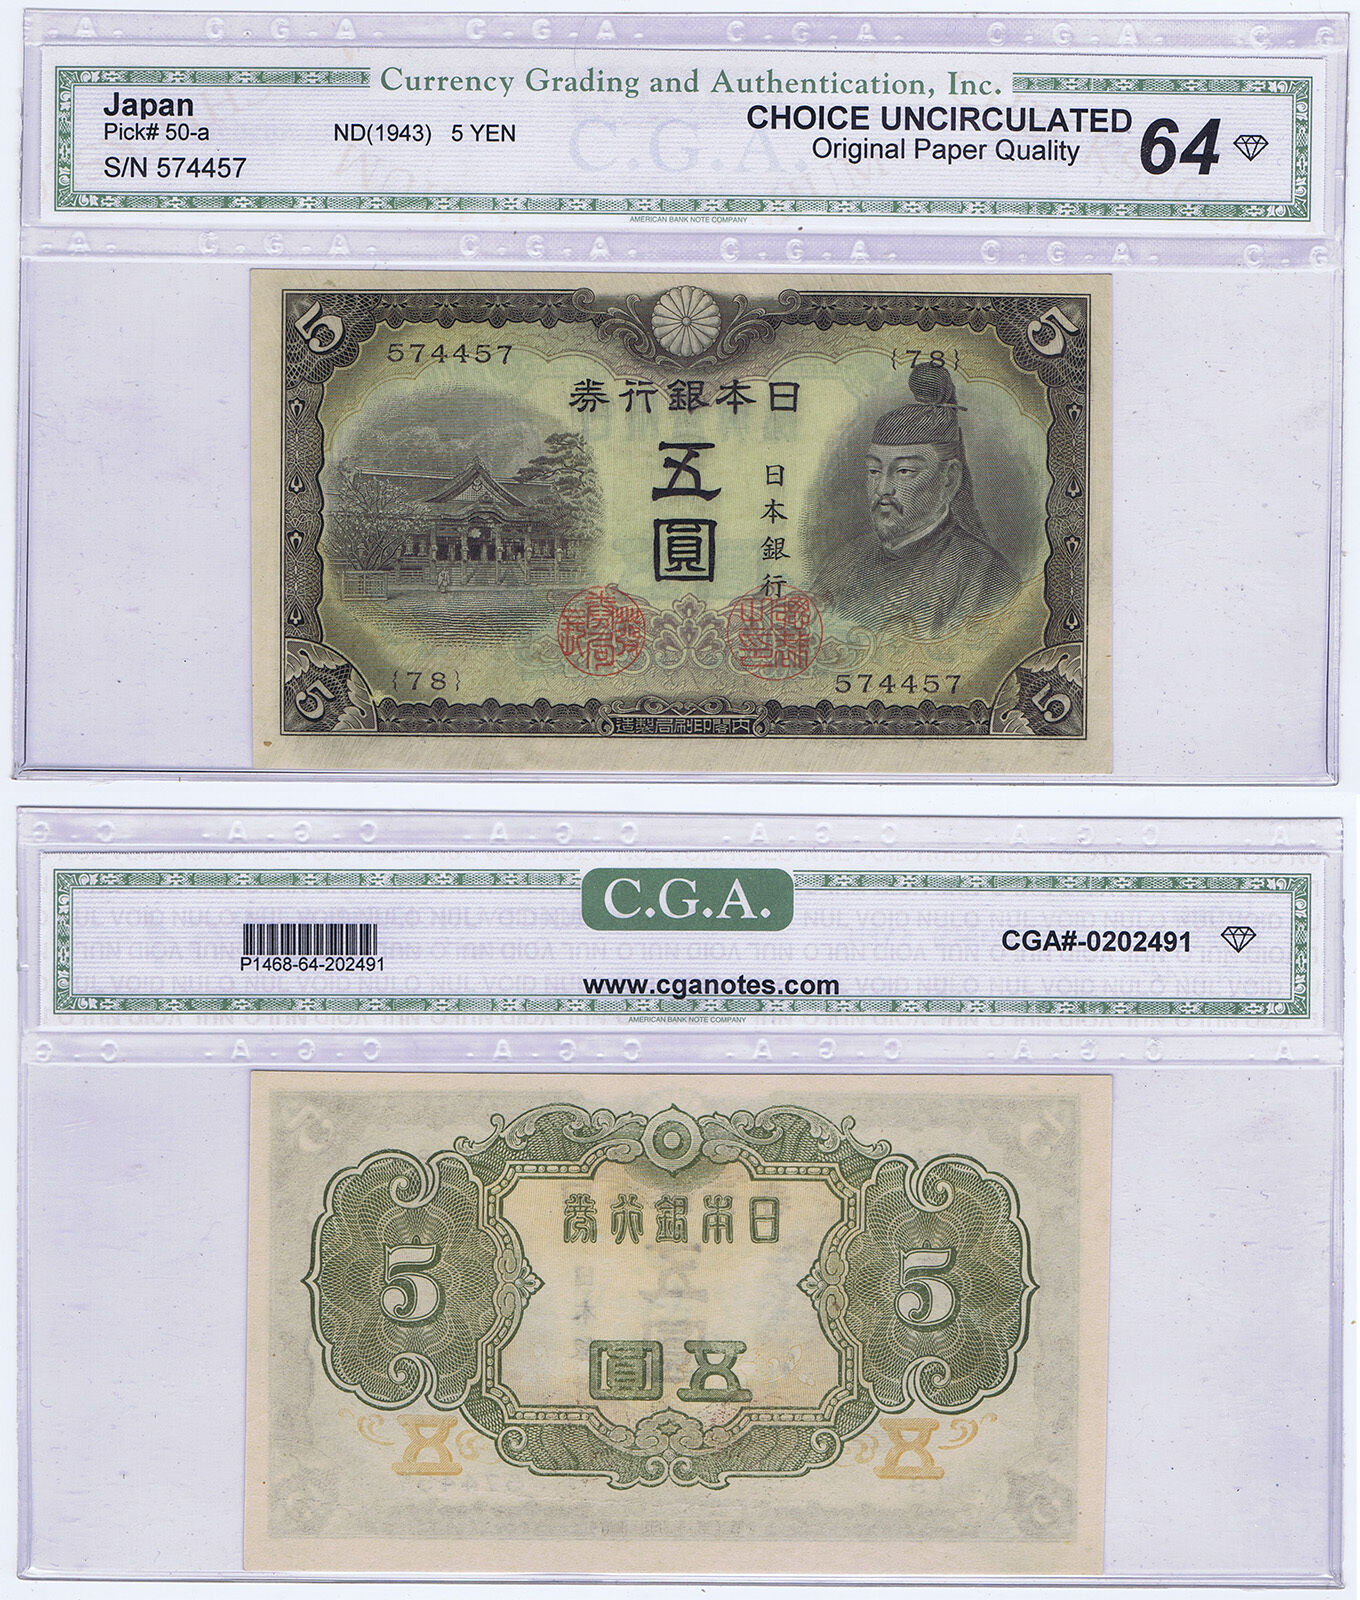 JAPAN PICK 50a of 1943 NICE CHOICE UNCIRCULATED ORIGINAL PAPER QUALITY